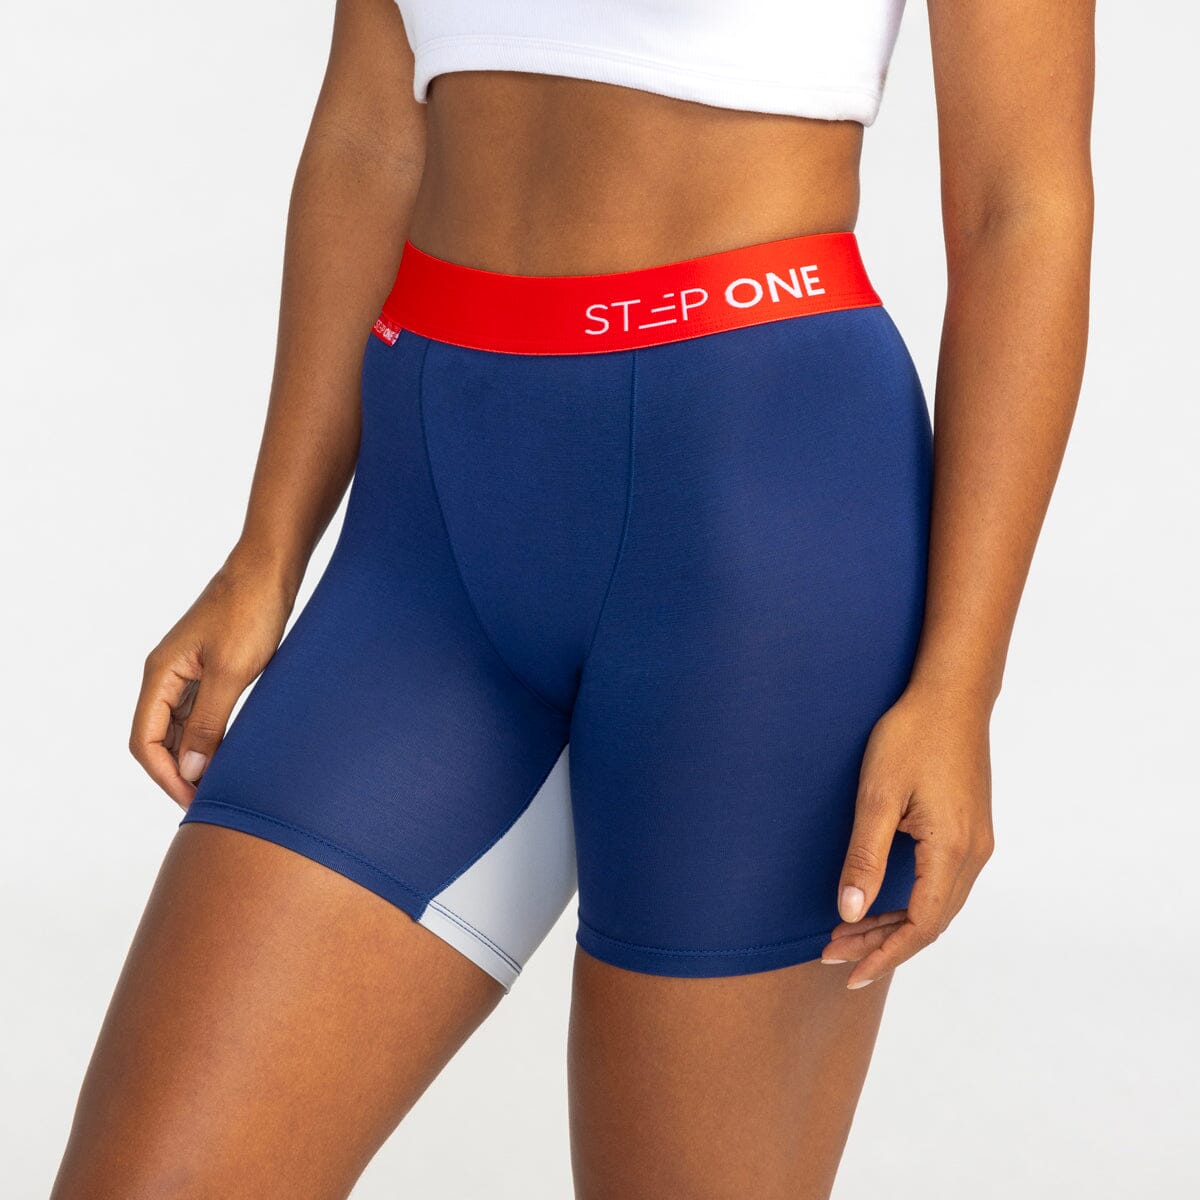 Buy womens bamboo underwear at Step One